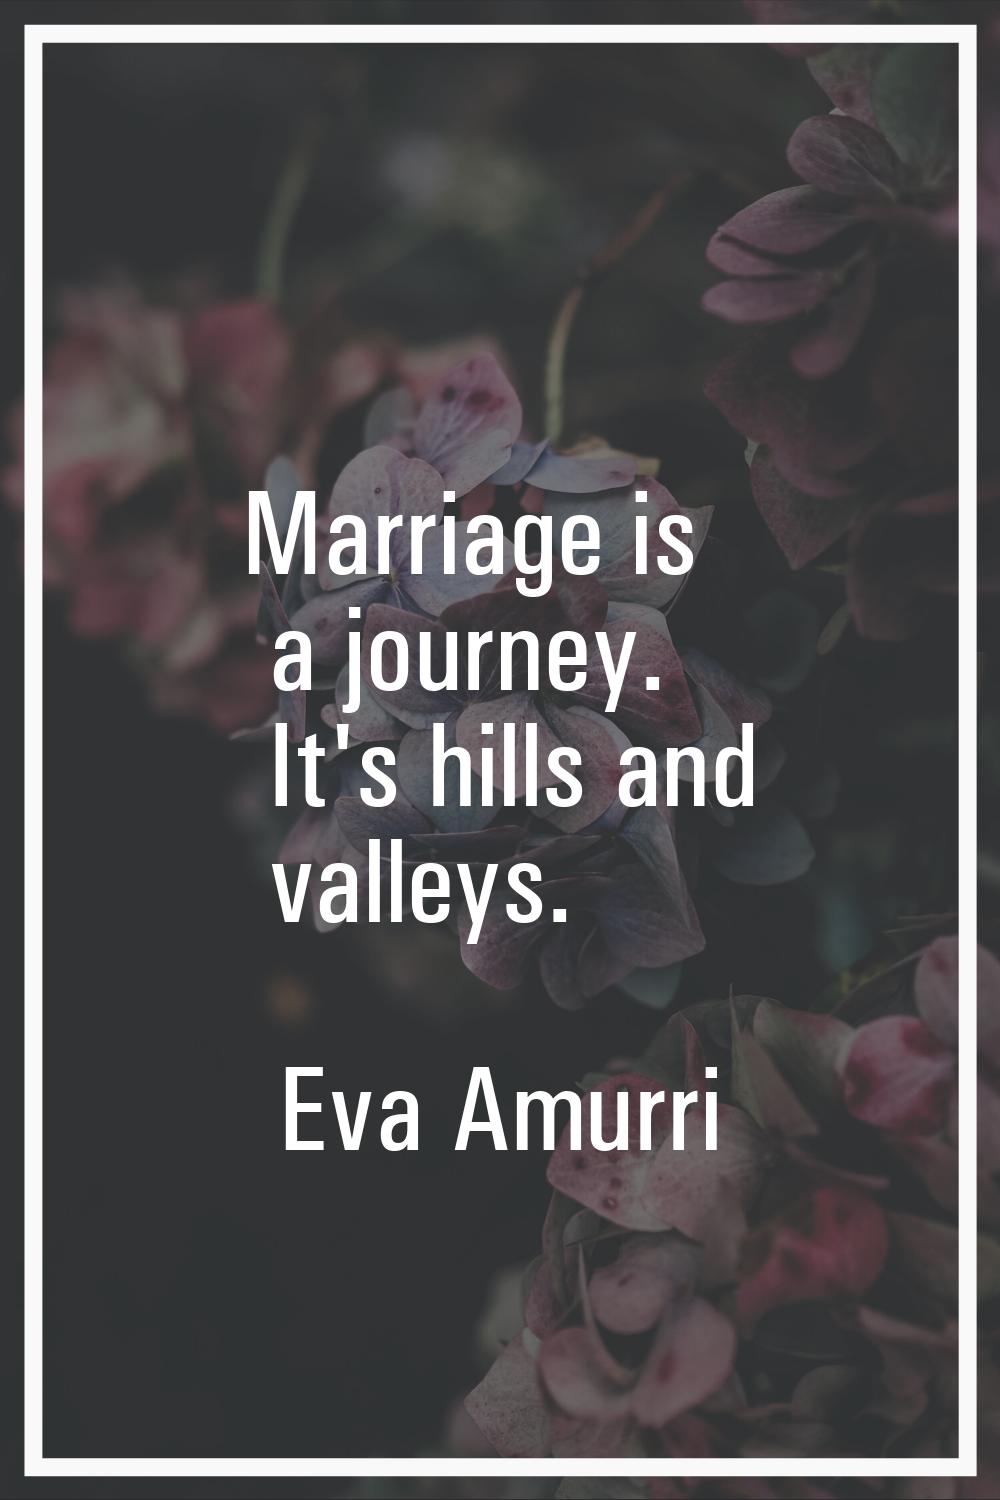 Marriage is a journey. It's hills and valleys.